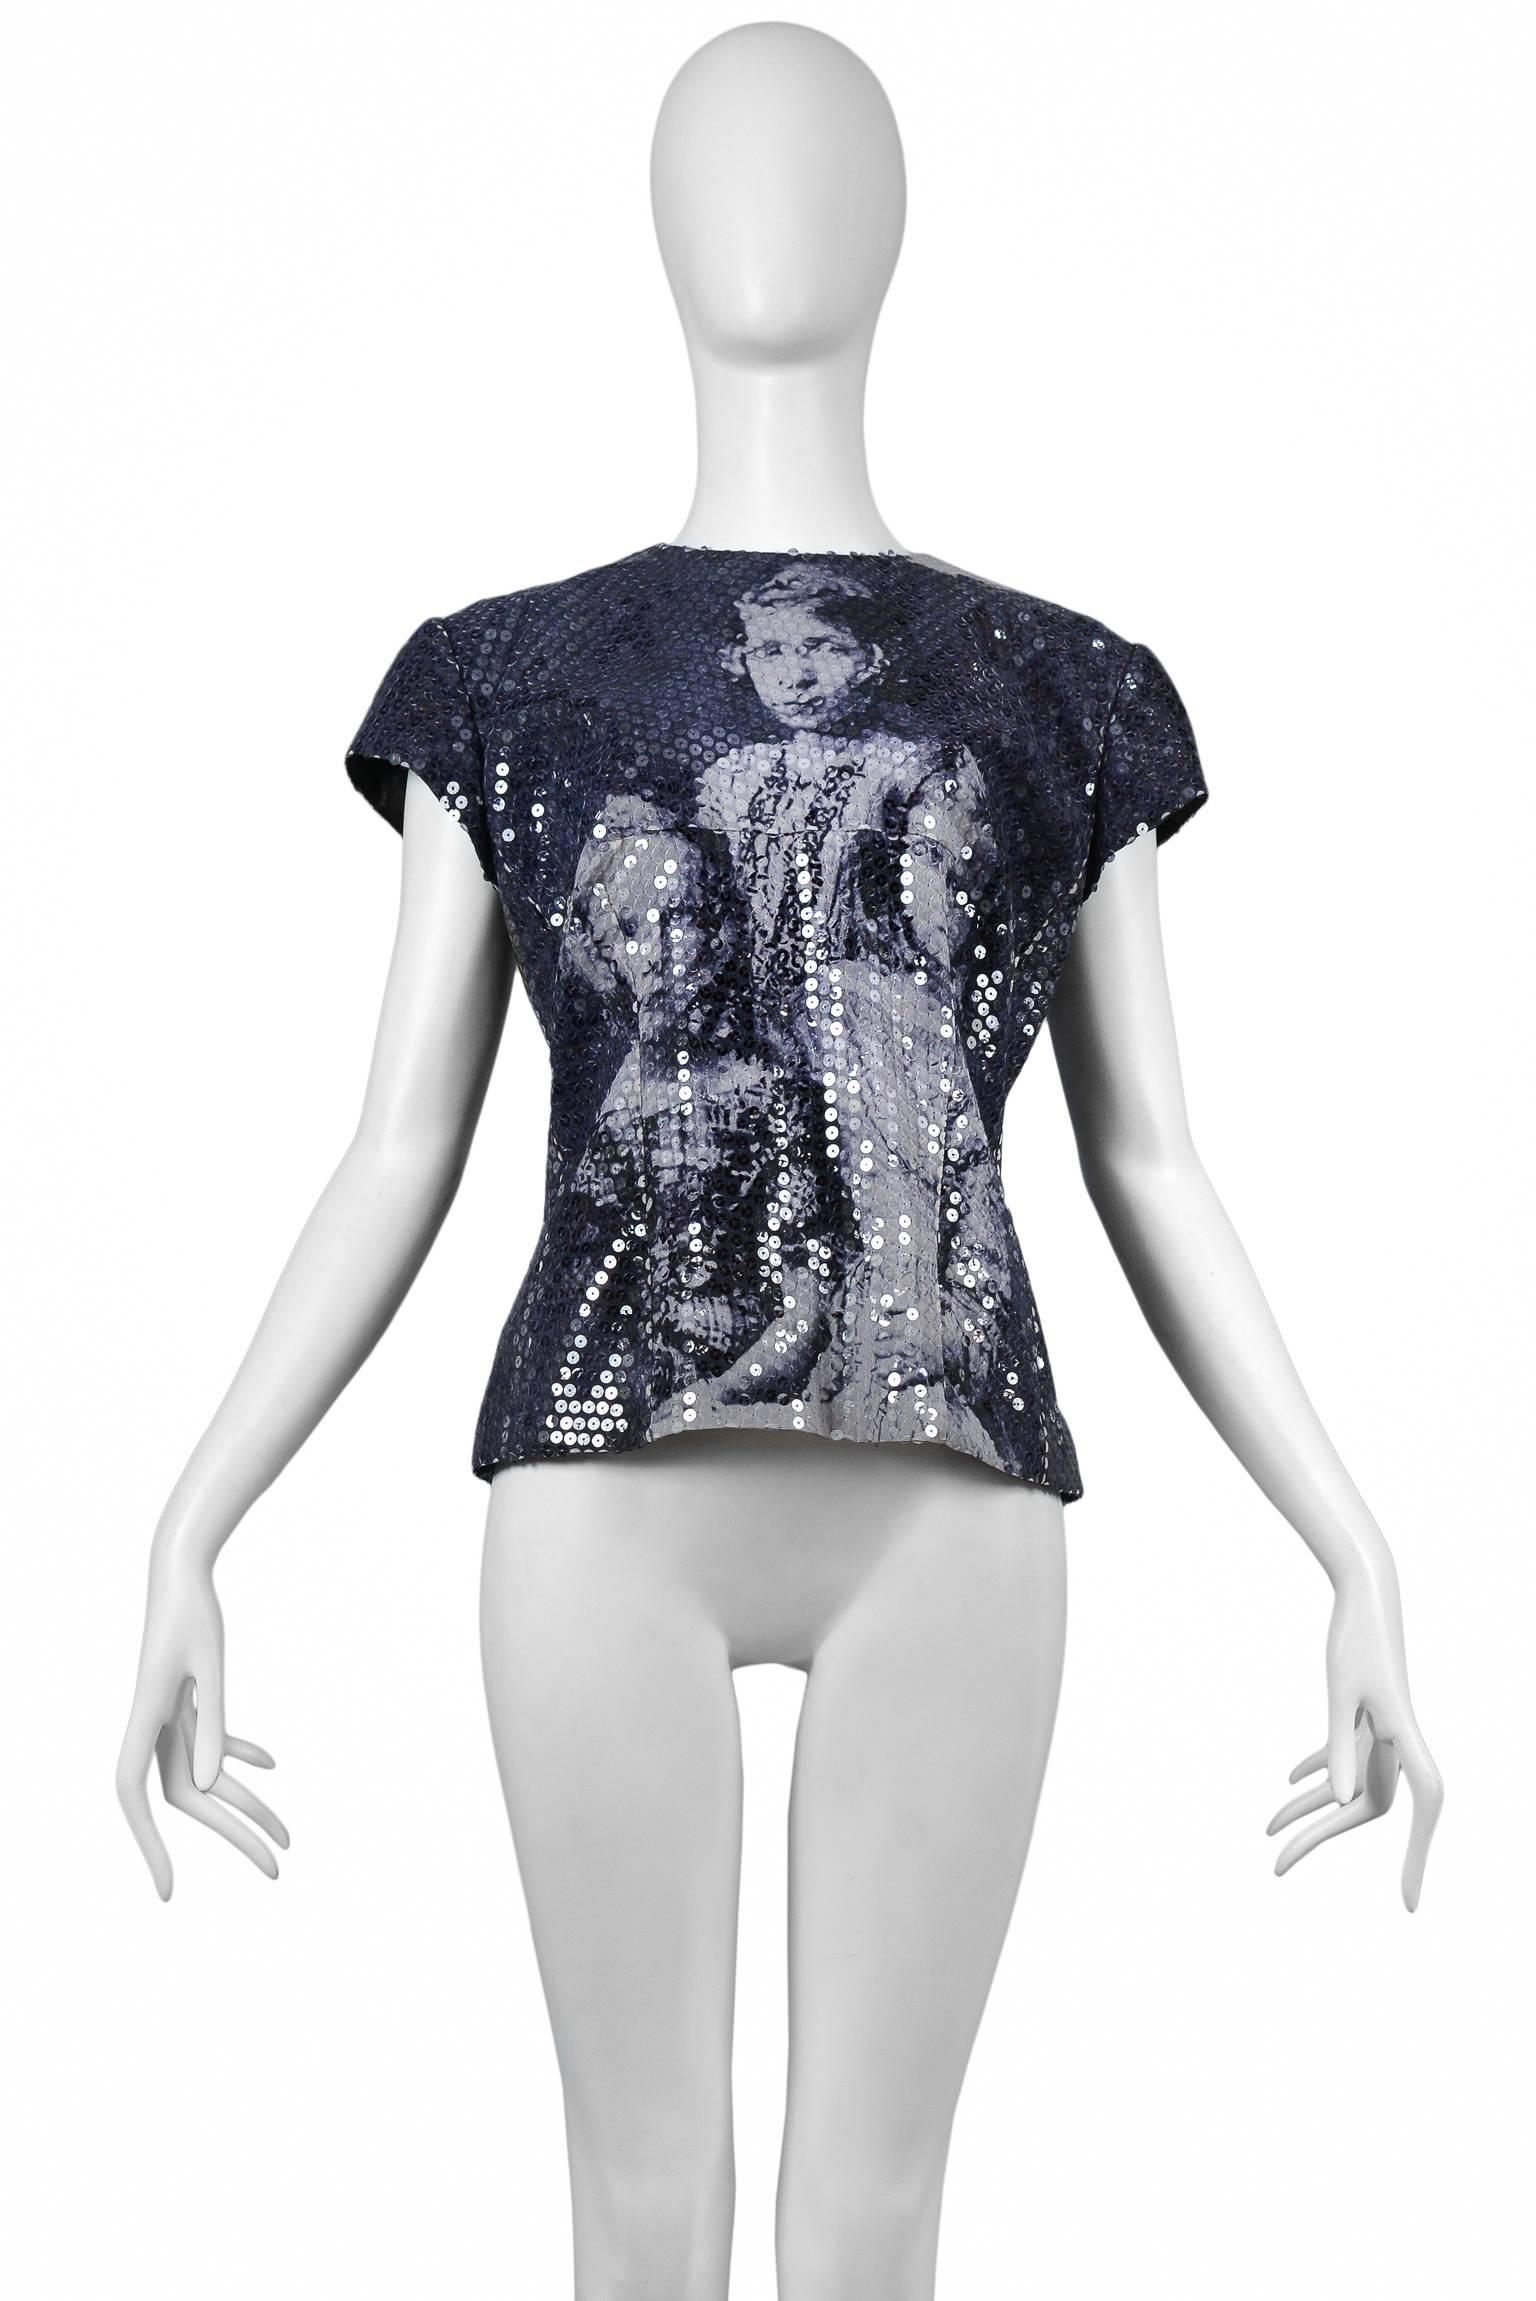 Resurrection Vintage is excited to offer an Alexander McQueen Romanov Children top from the Joan collection, featuring a high neck, short sleeves, iconic historical print of the Russian Imperial Romanov Children, fitted bodice, and center back